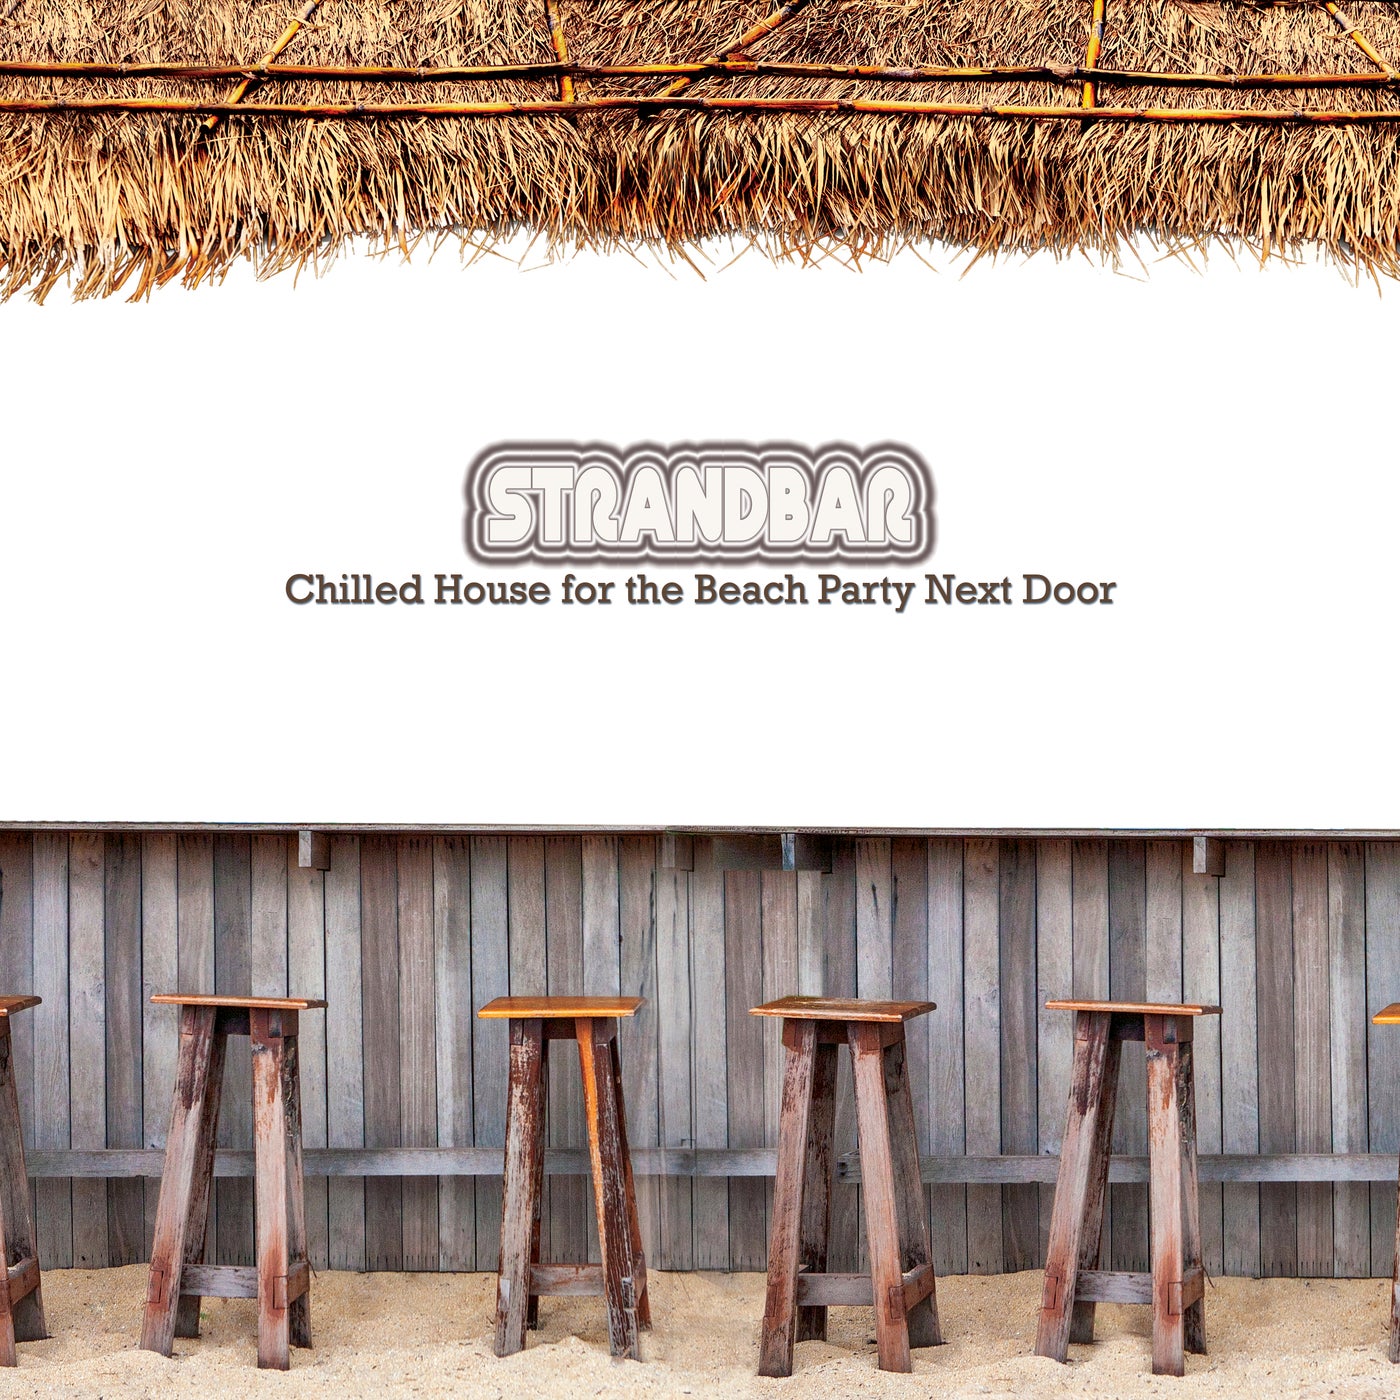 Strandbar: Chilled House for the Beach Party Next Door